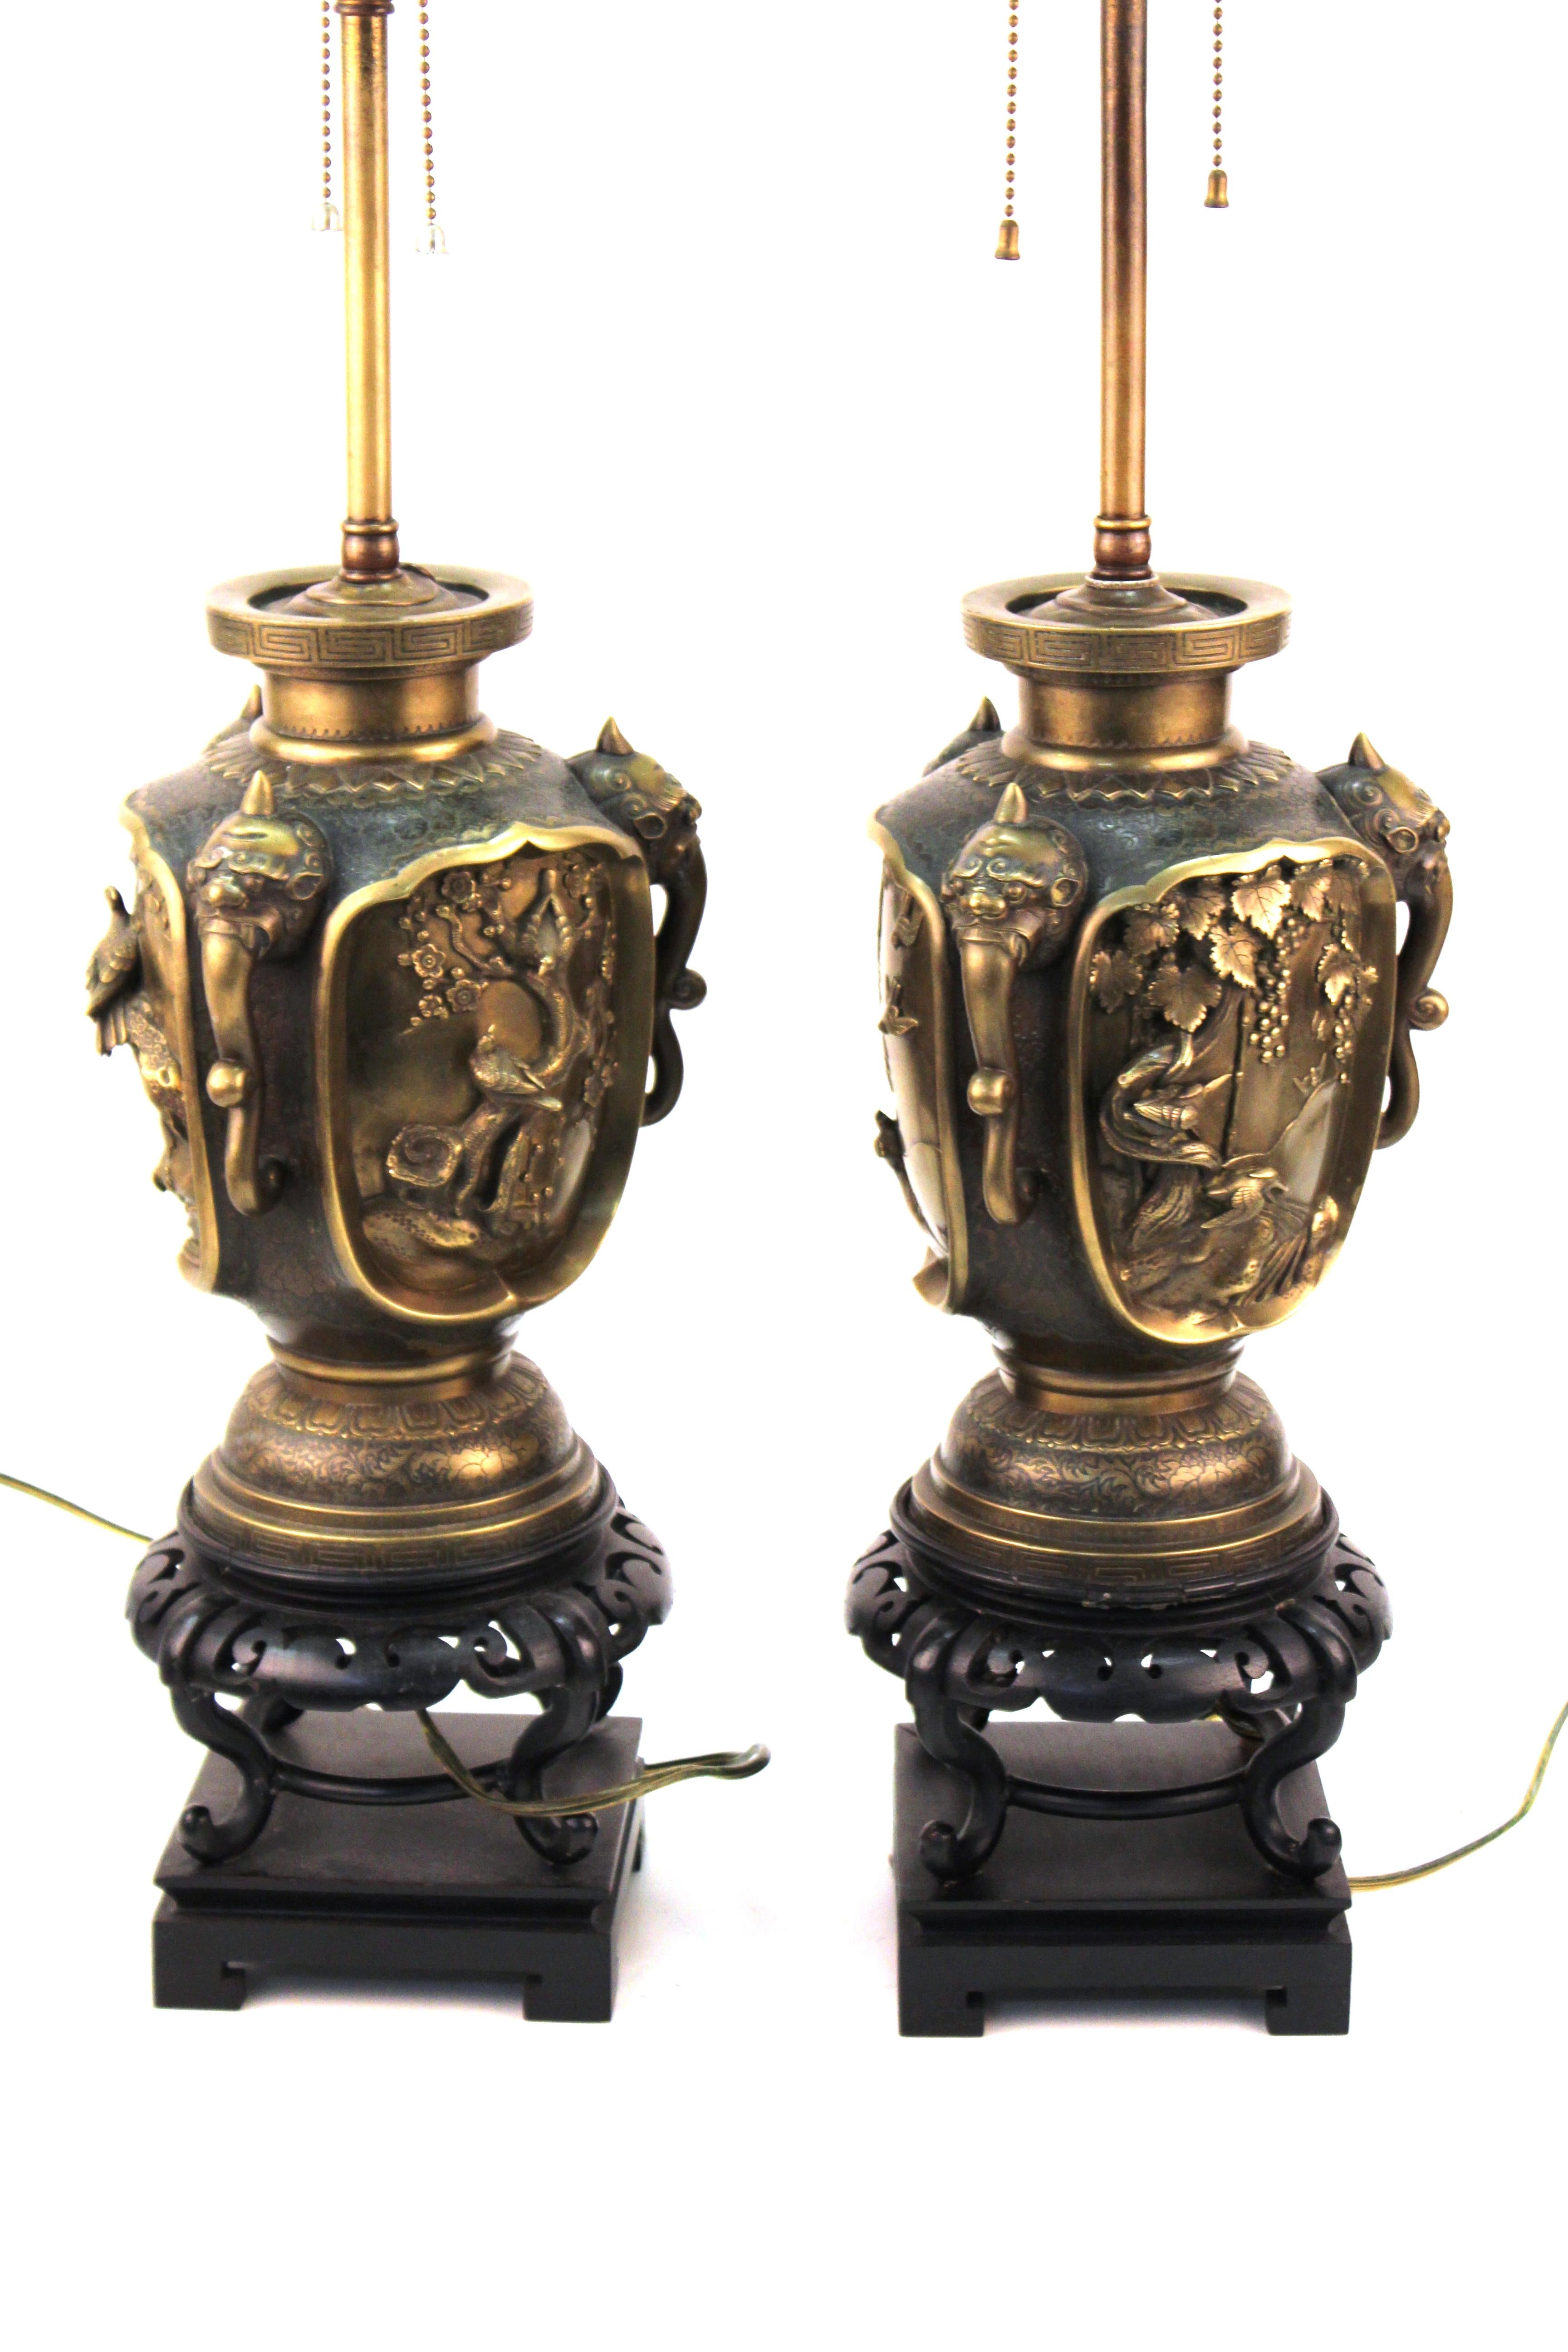 Japanese Meiji period bronze urn form table lamps. Each urn with three horned beast handles and relief animal and landscape scenes. Each has a decorative Ming-Xuande reign mark. The pair has been cleaned, causing a loss to the original applied